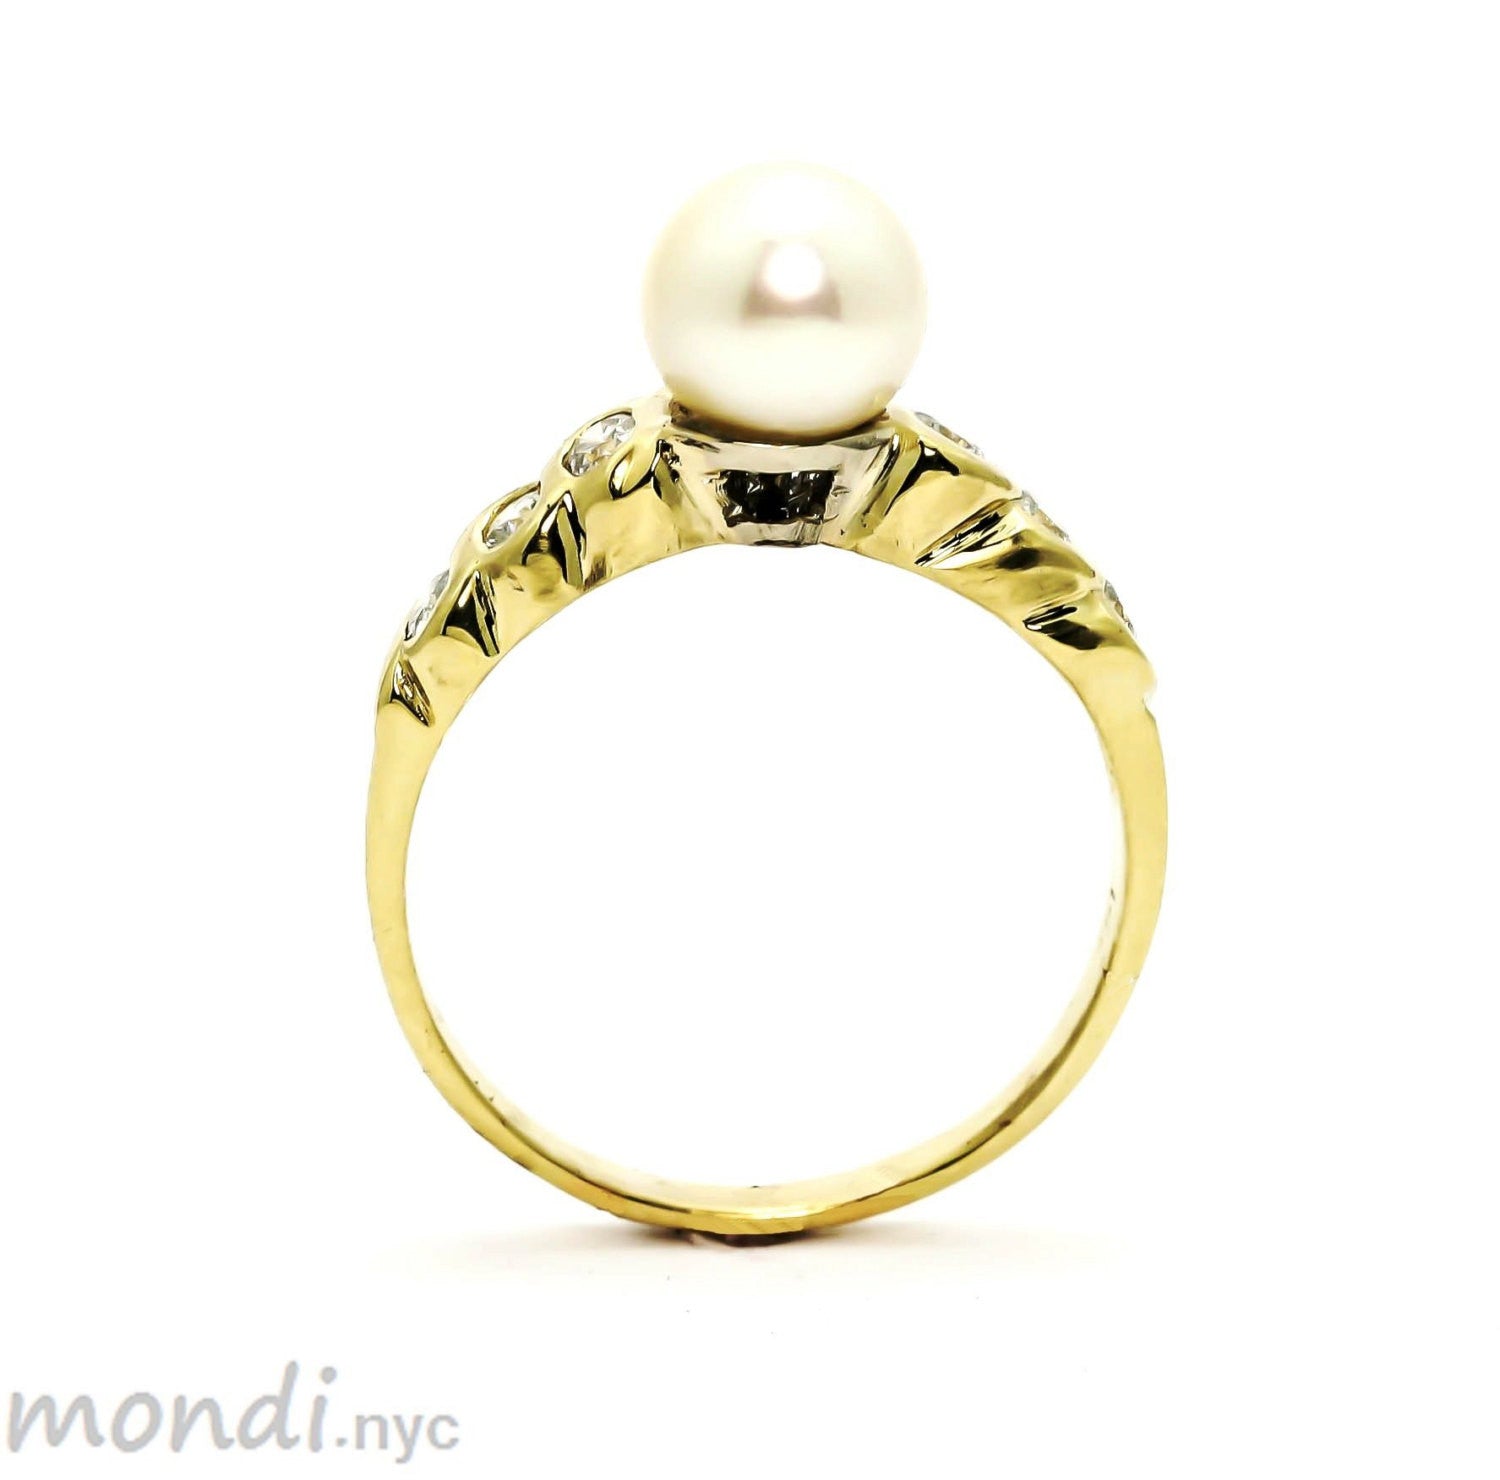 Pearl & Diamond Engagement Ring, Anniversary Ring, Cocktail Ring